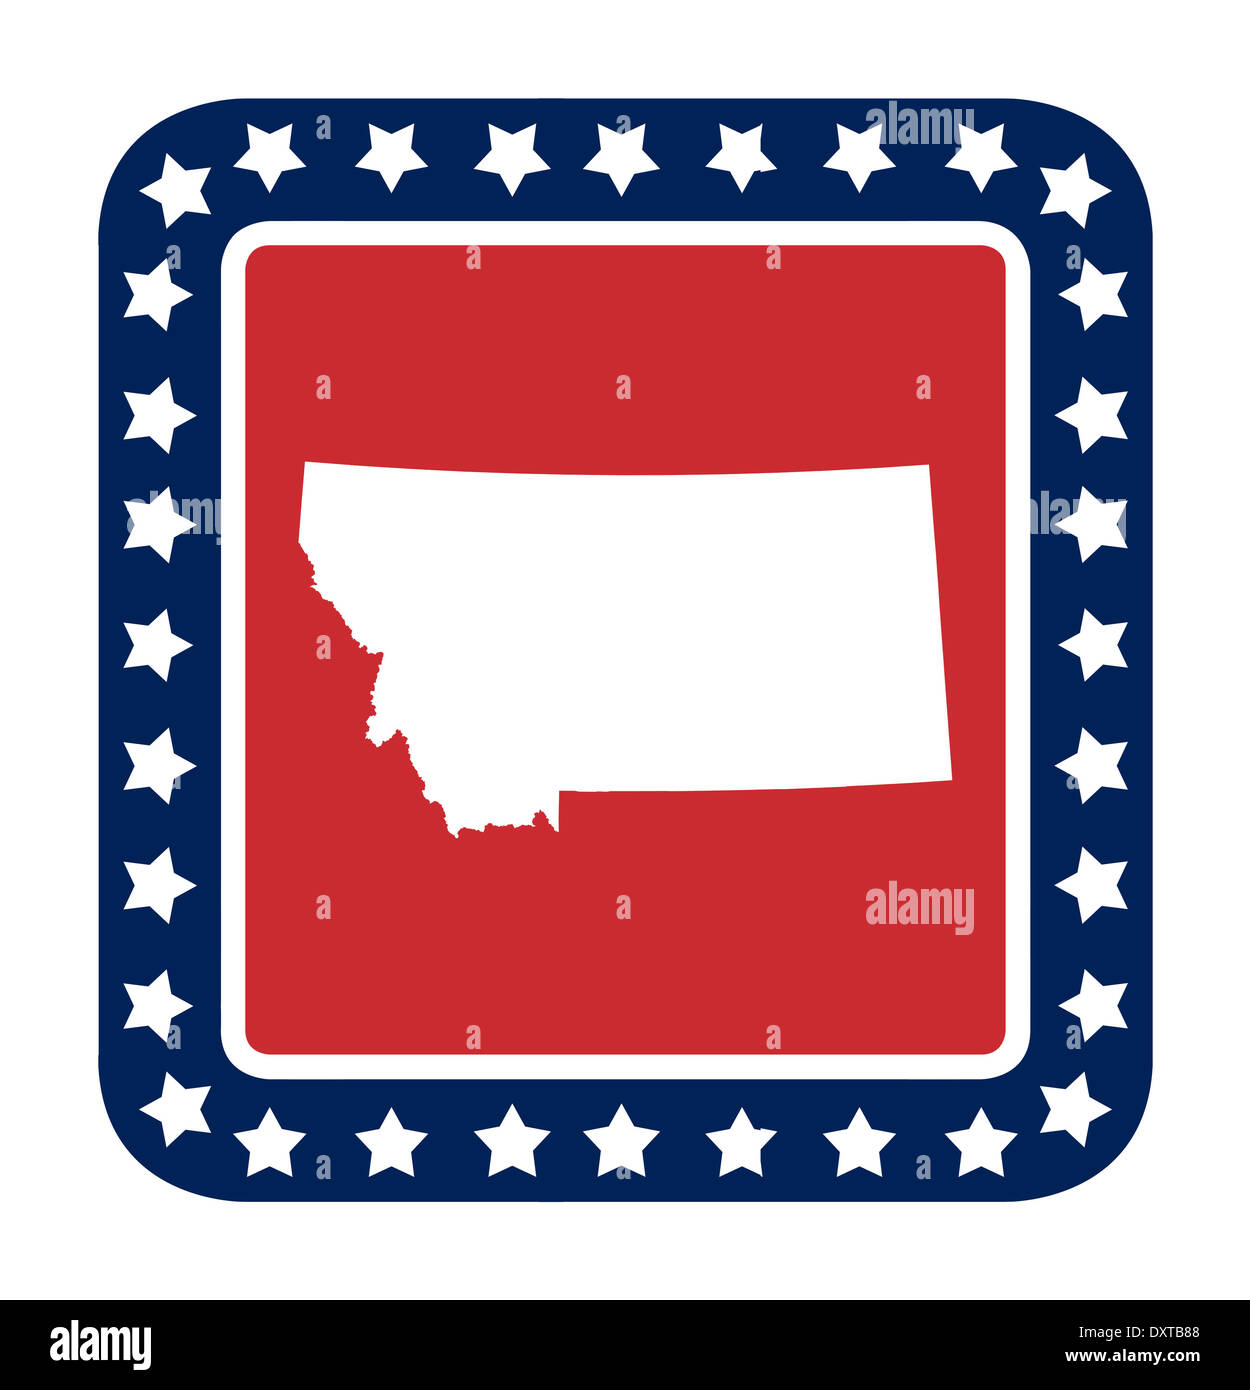 Montana state button on American flag in flat web design style, isolated on white background. Stock Photo